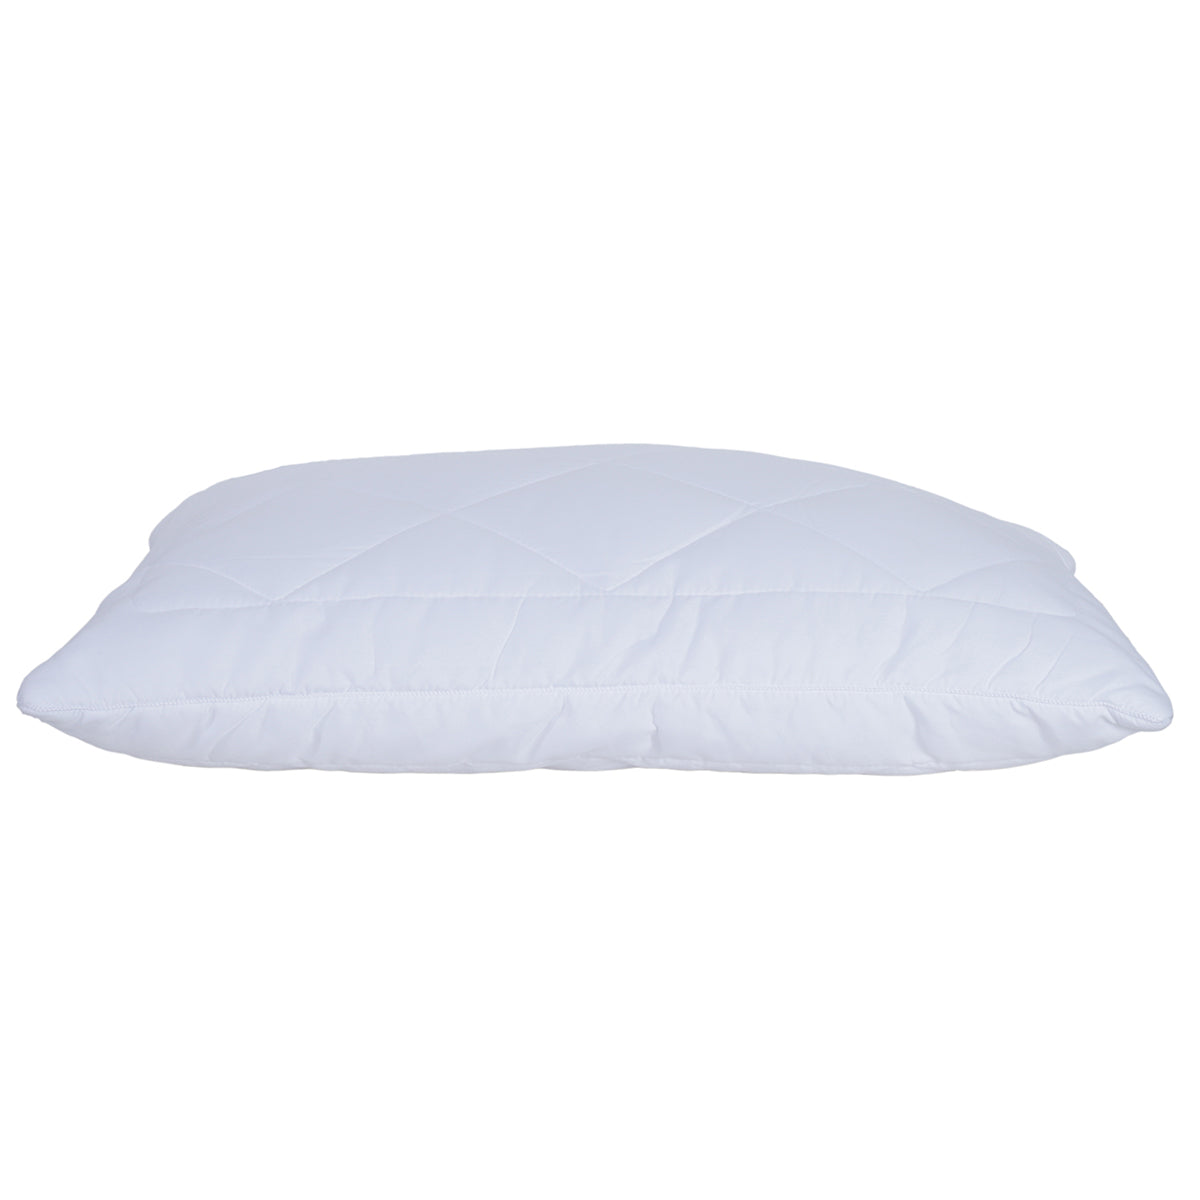 Classica Quilted Shell with Enhanced Comfort Pillow